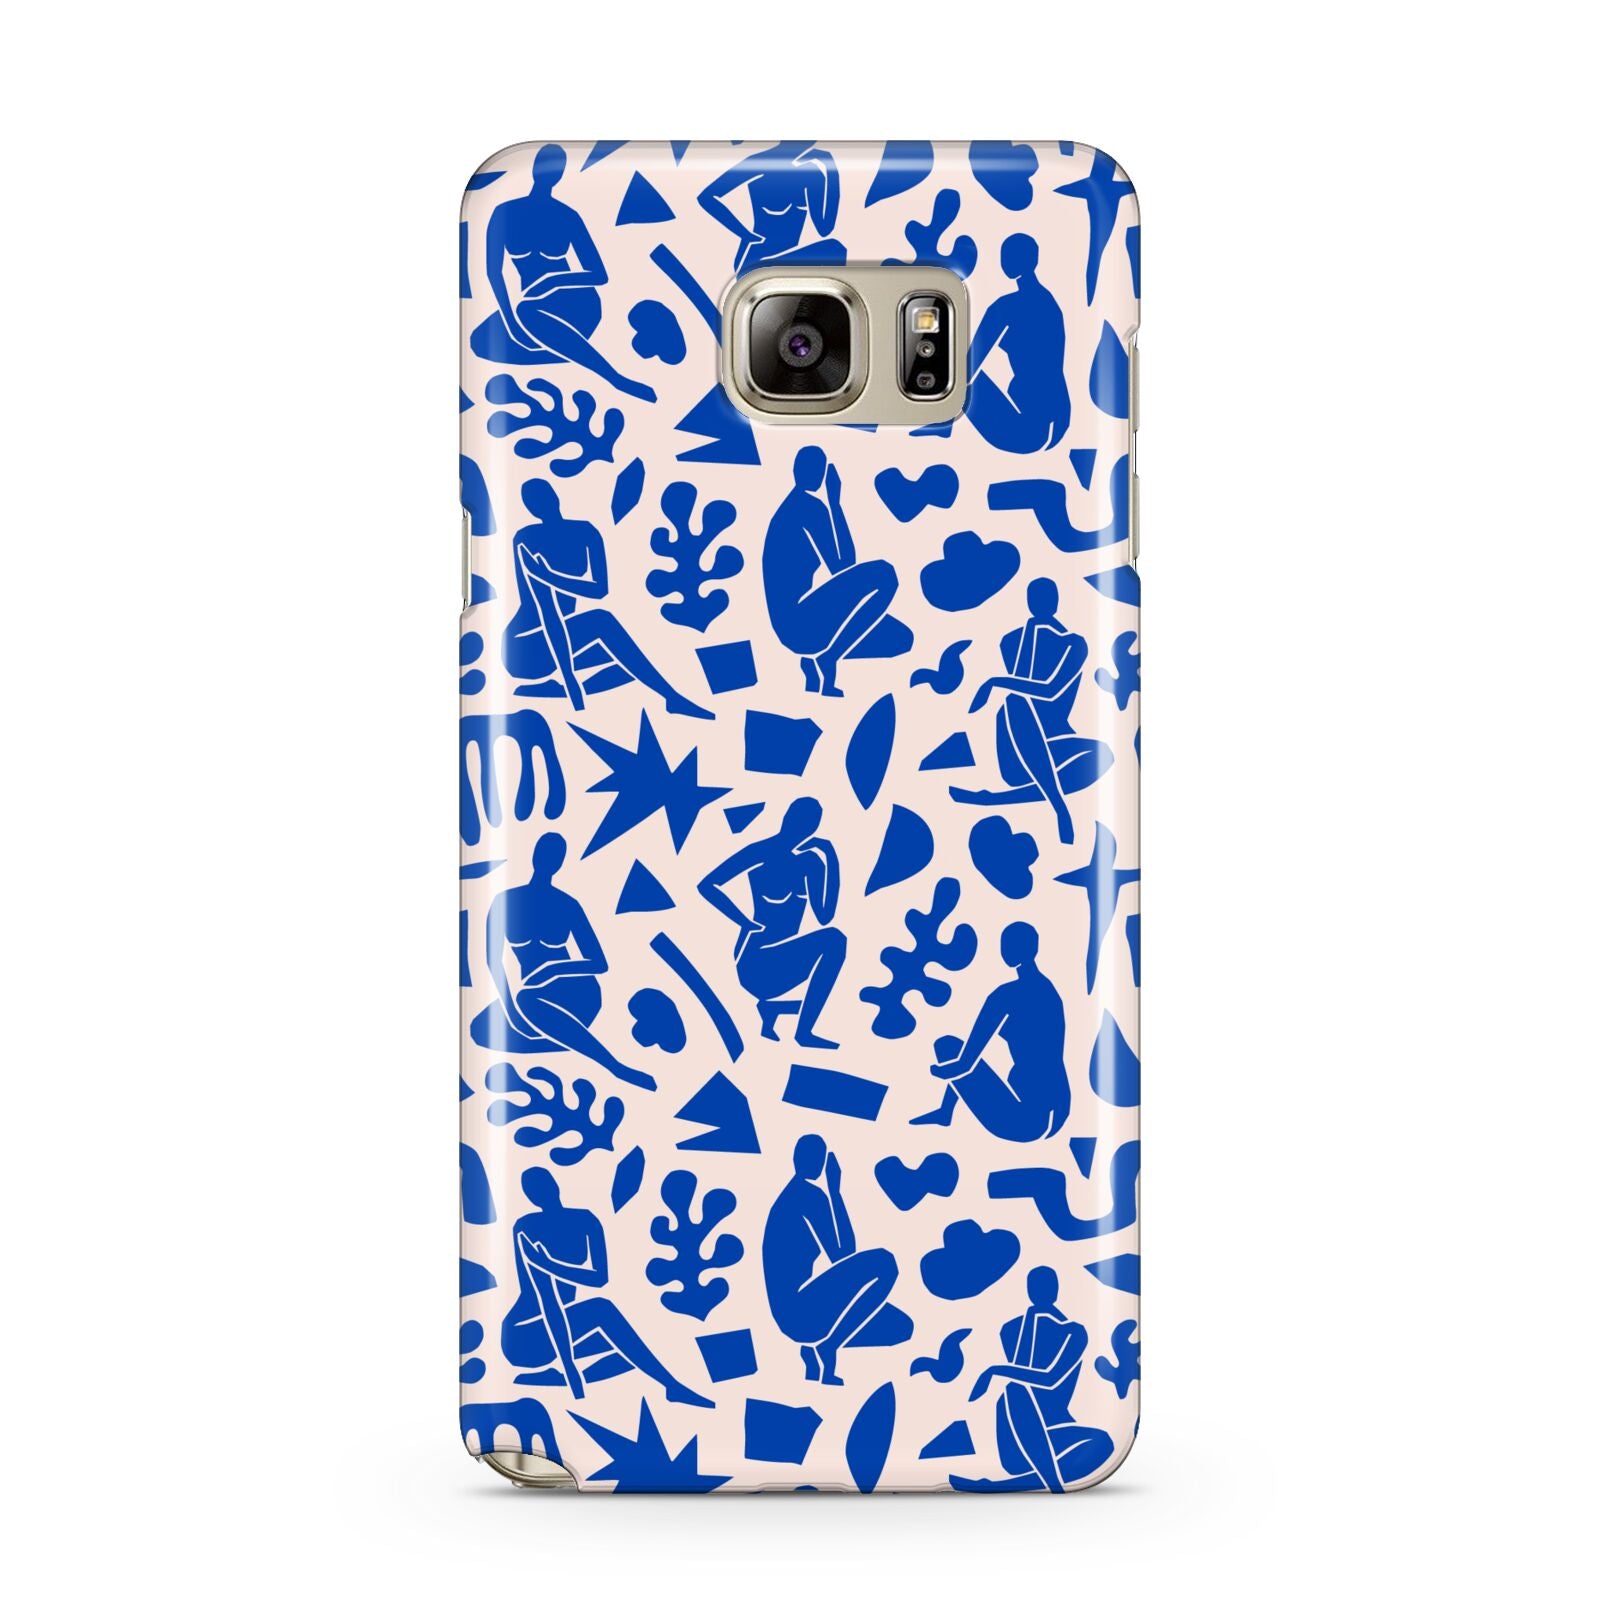 Abstract Art Samsung Galaxy Note 5 Case